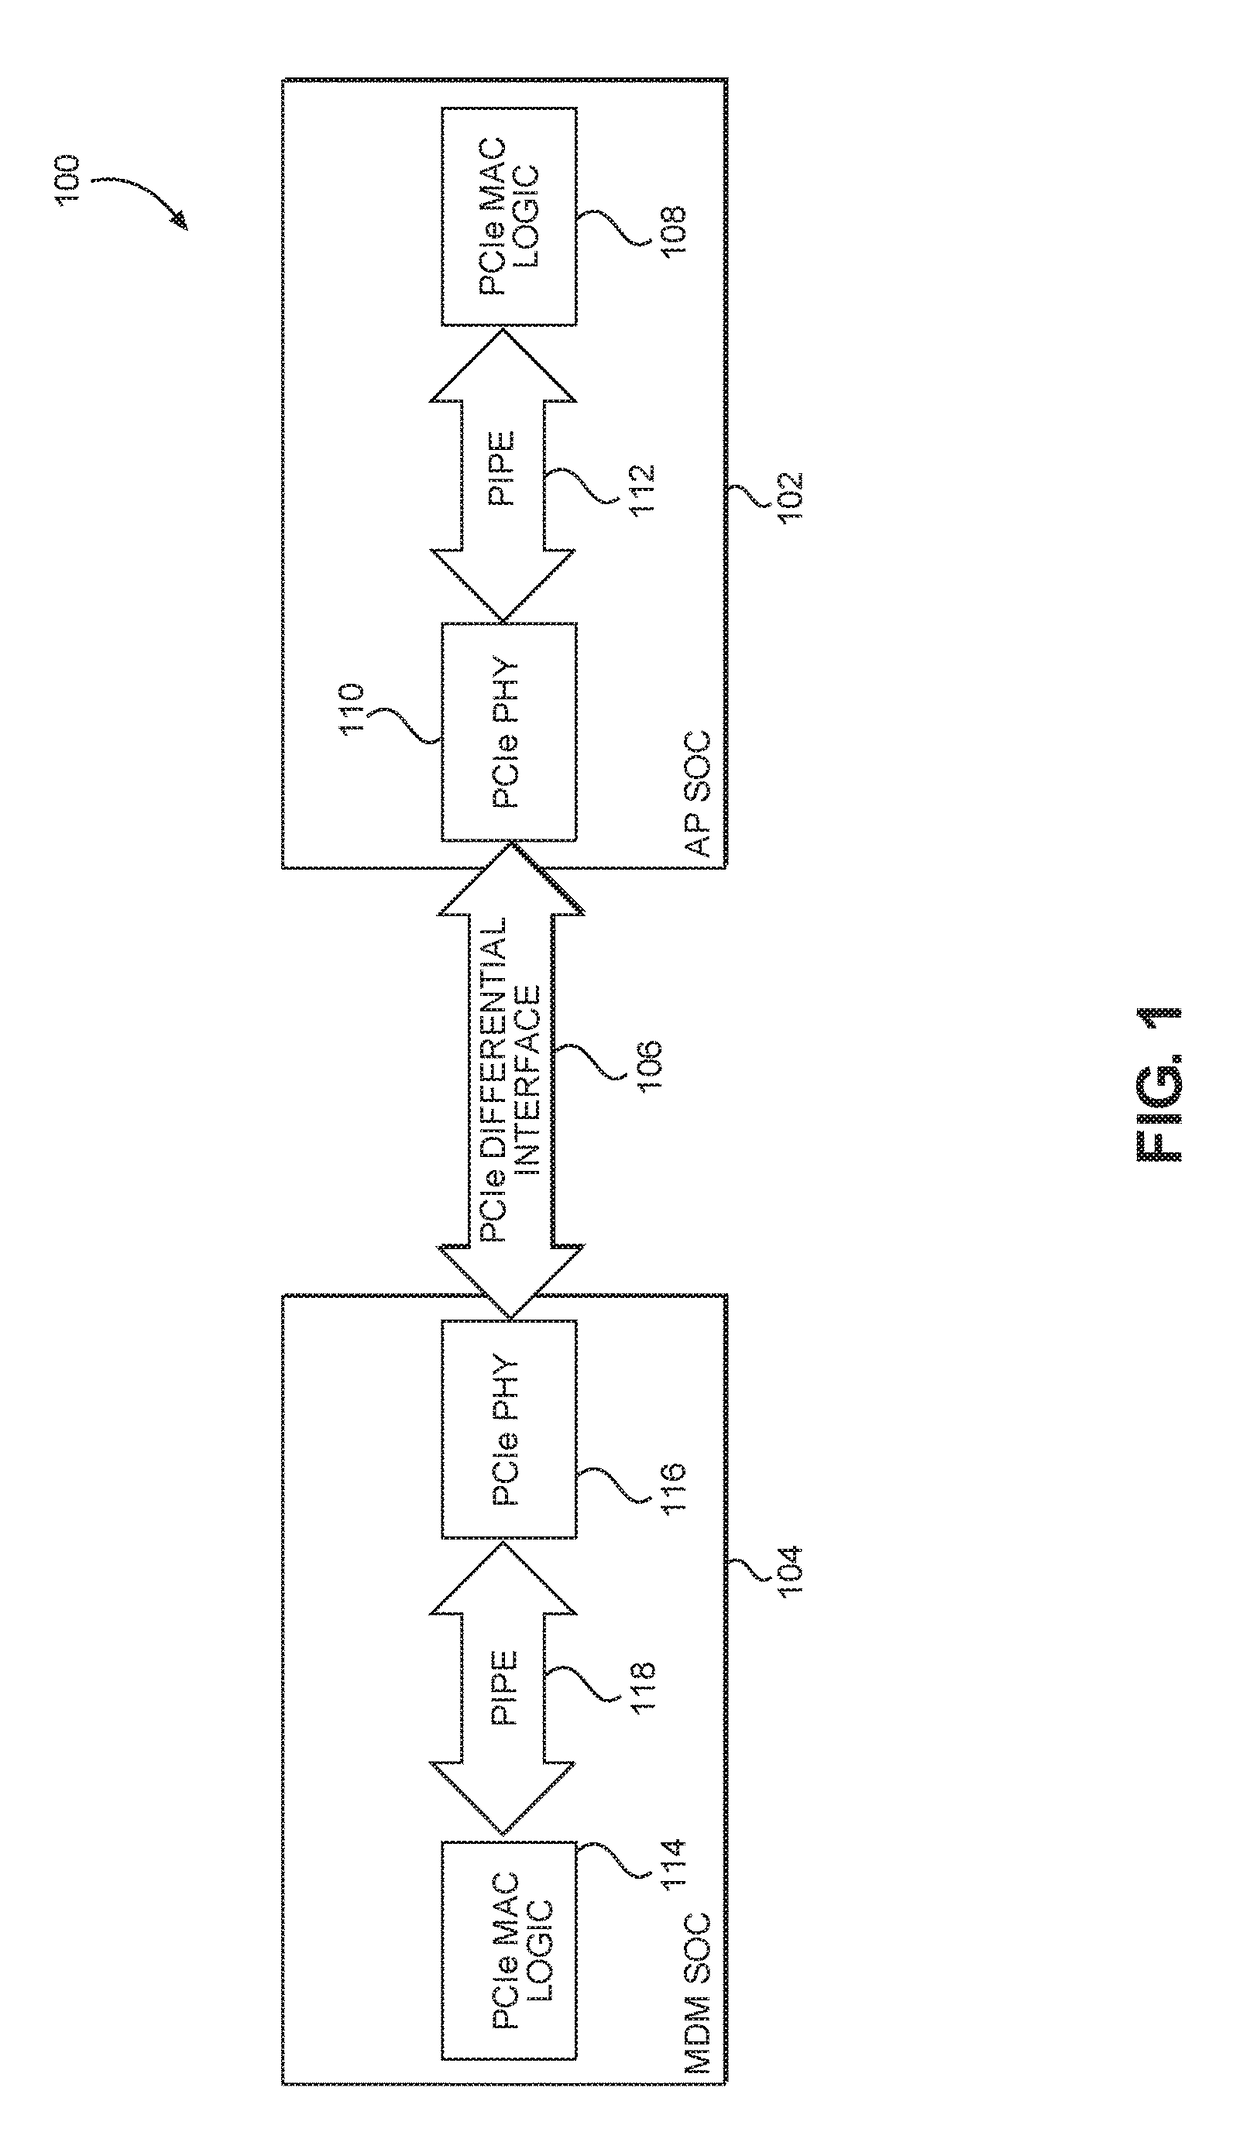 REPLACEMENT PHYSICAL LAYER (PHY) FOR LOW-SPEED PERIPHERAL COMPONENT INTERCONNECT (PCI) EXPRESS (PCIe) SYSTEMS